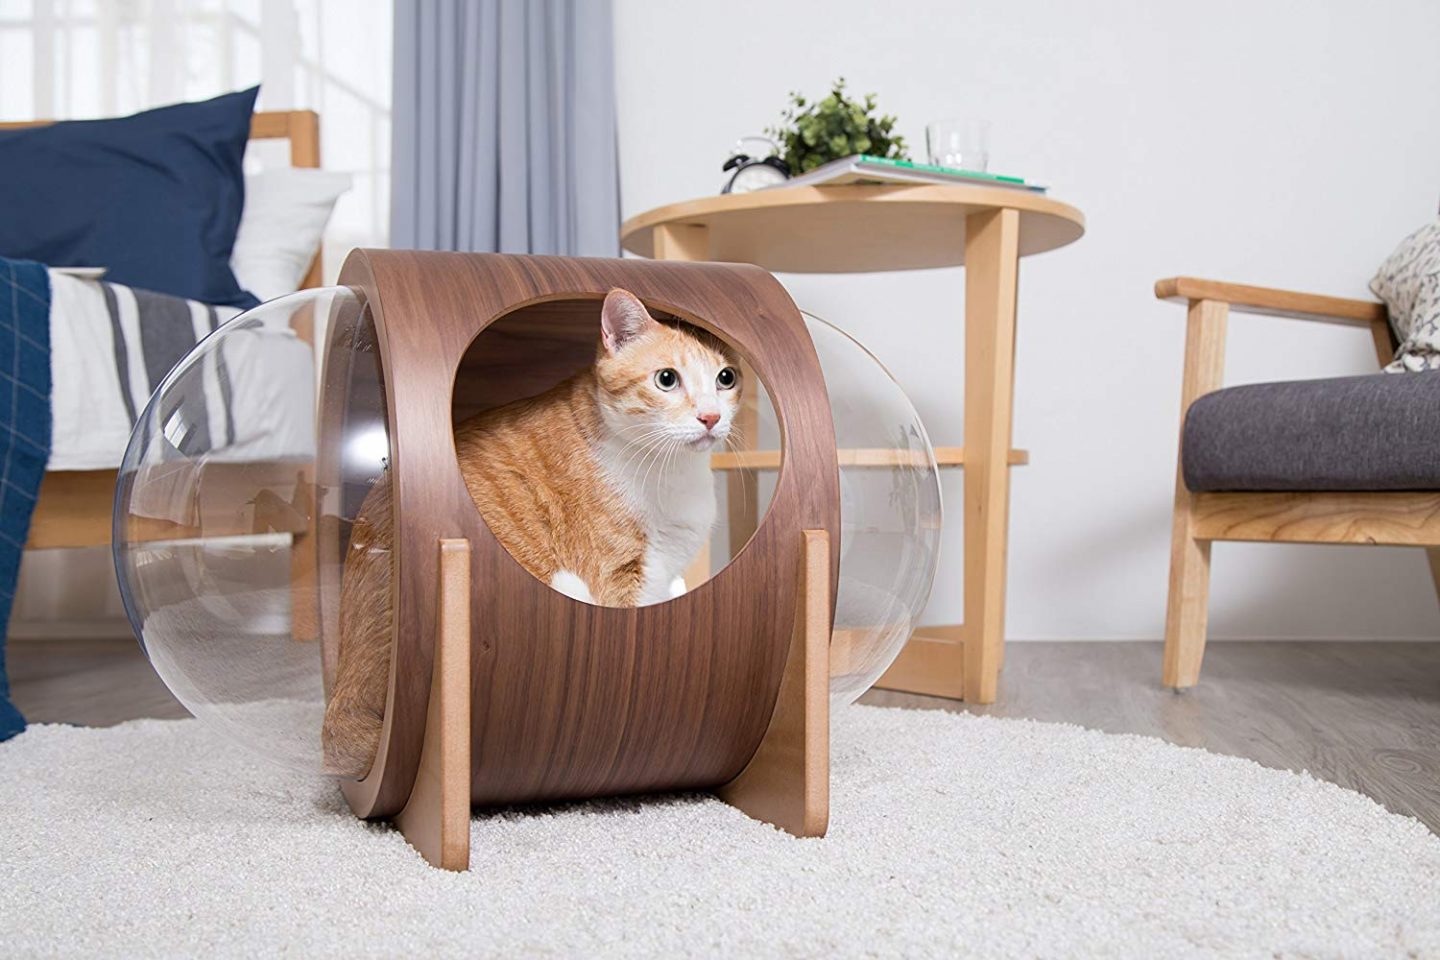 The Spaceship Alpha from MyZoo is an A+ addition to work with your modern cat furniture shelves.